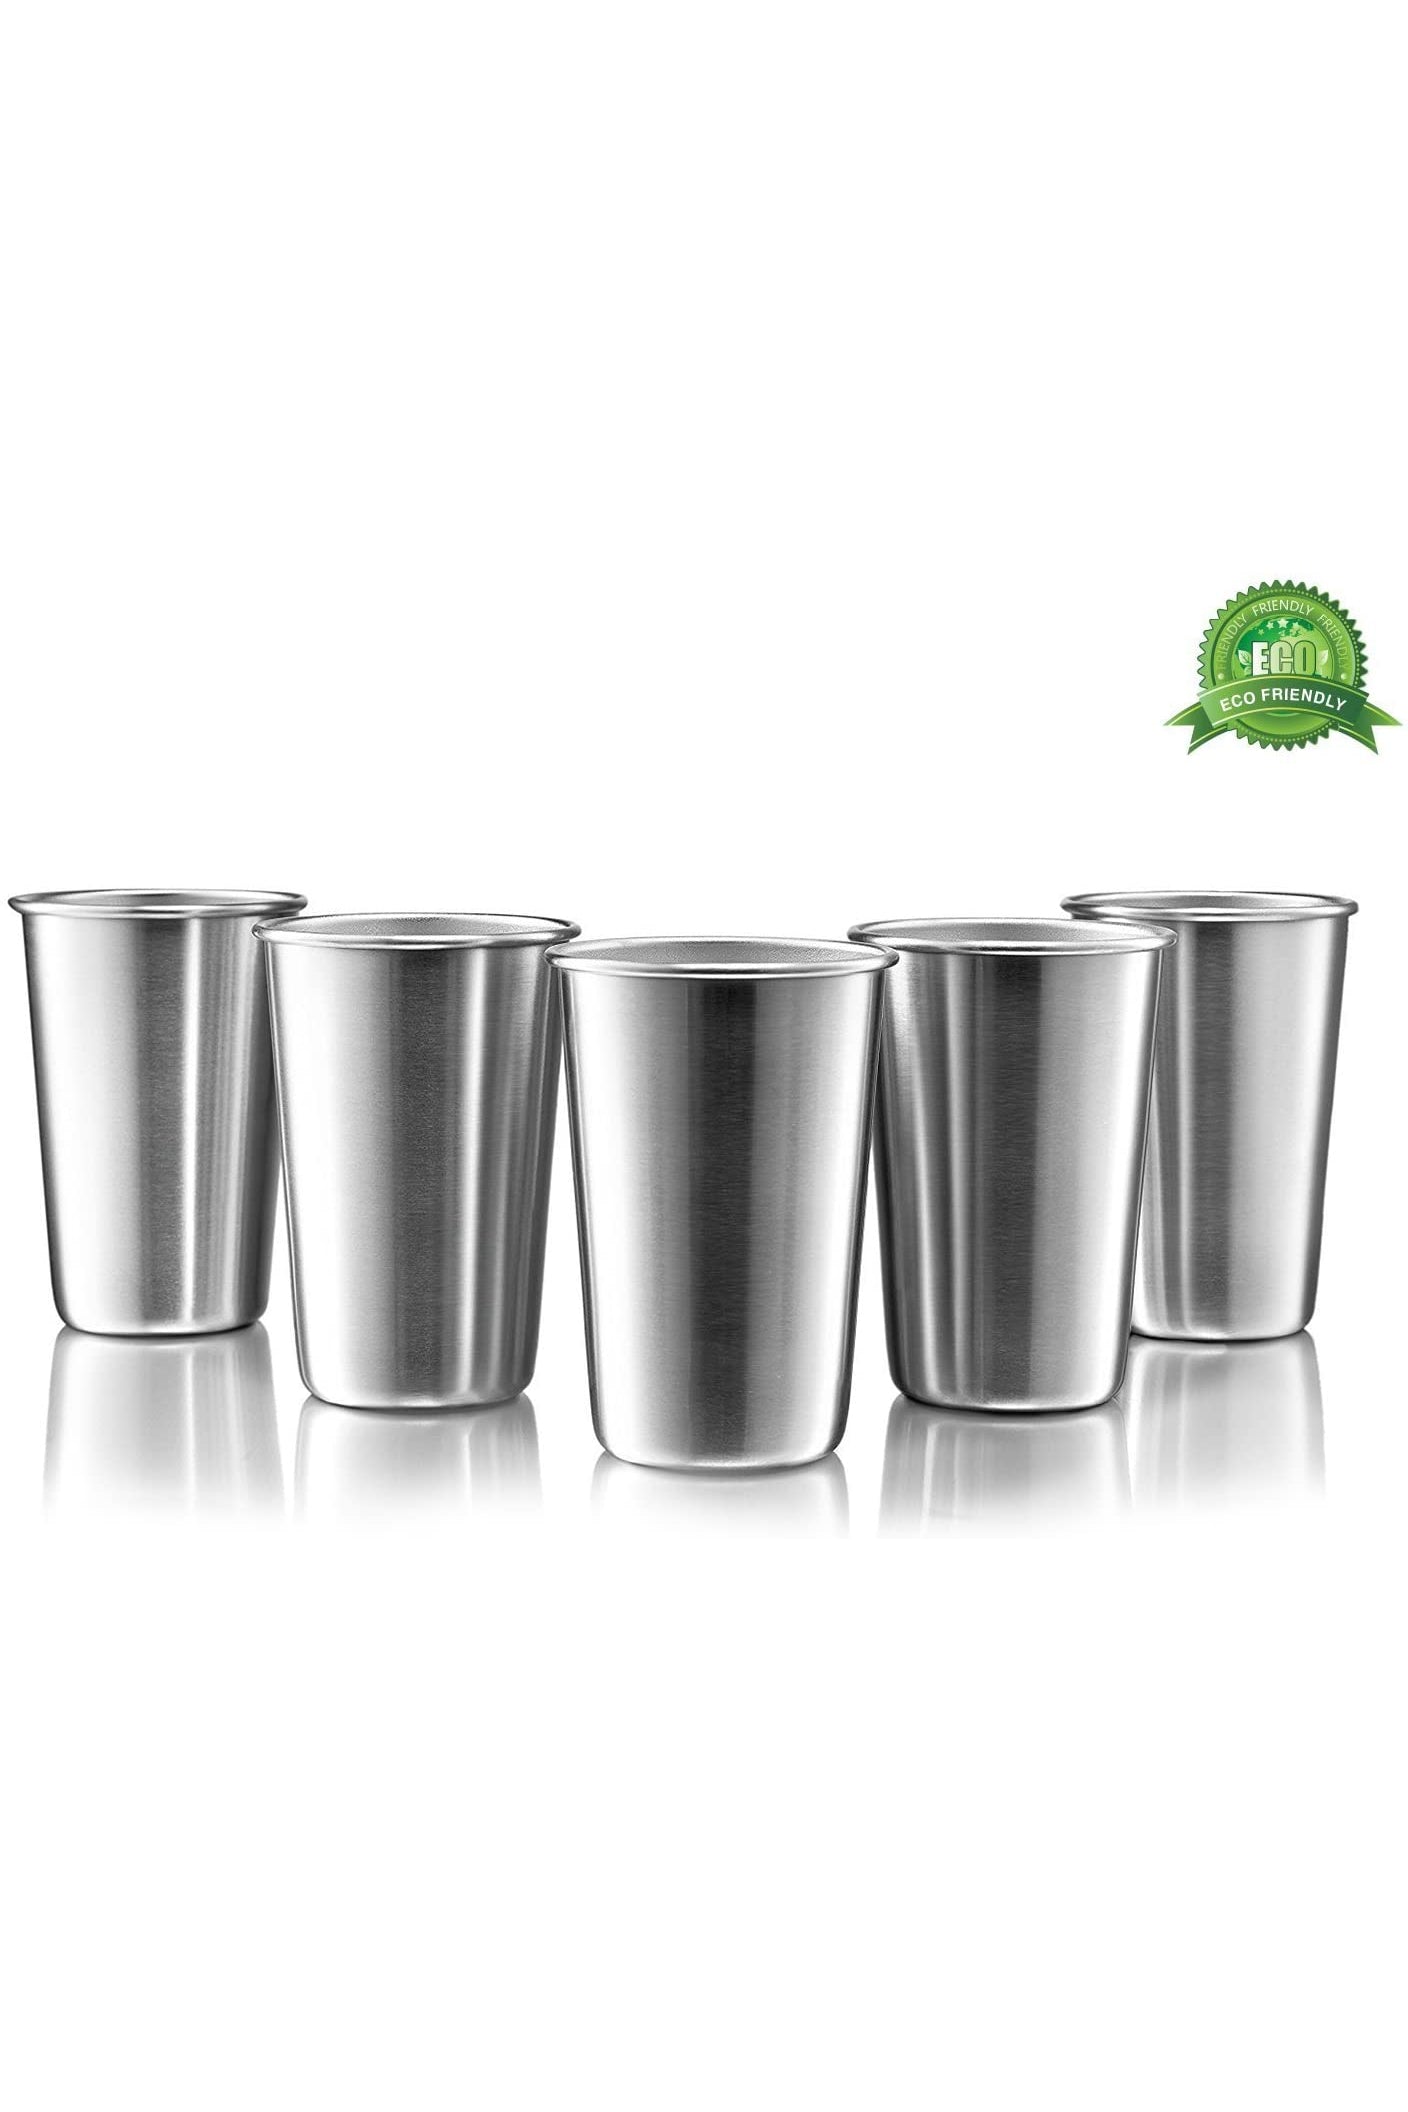 6 Pack 8 oz Stainless Steel Kids Cups, Children's Pint Cups, Stackable  Durable Metal Cups, Shatterproof Drinking Glasses